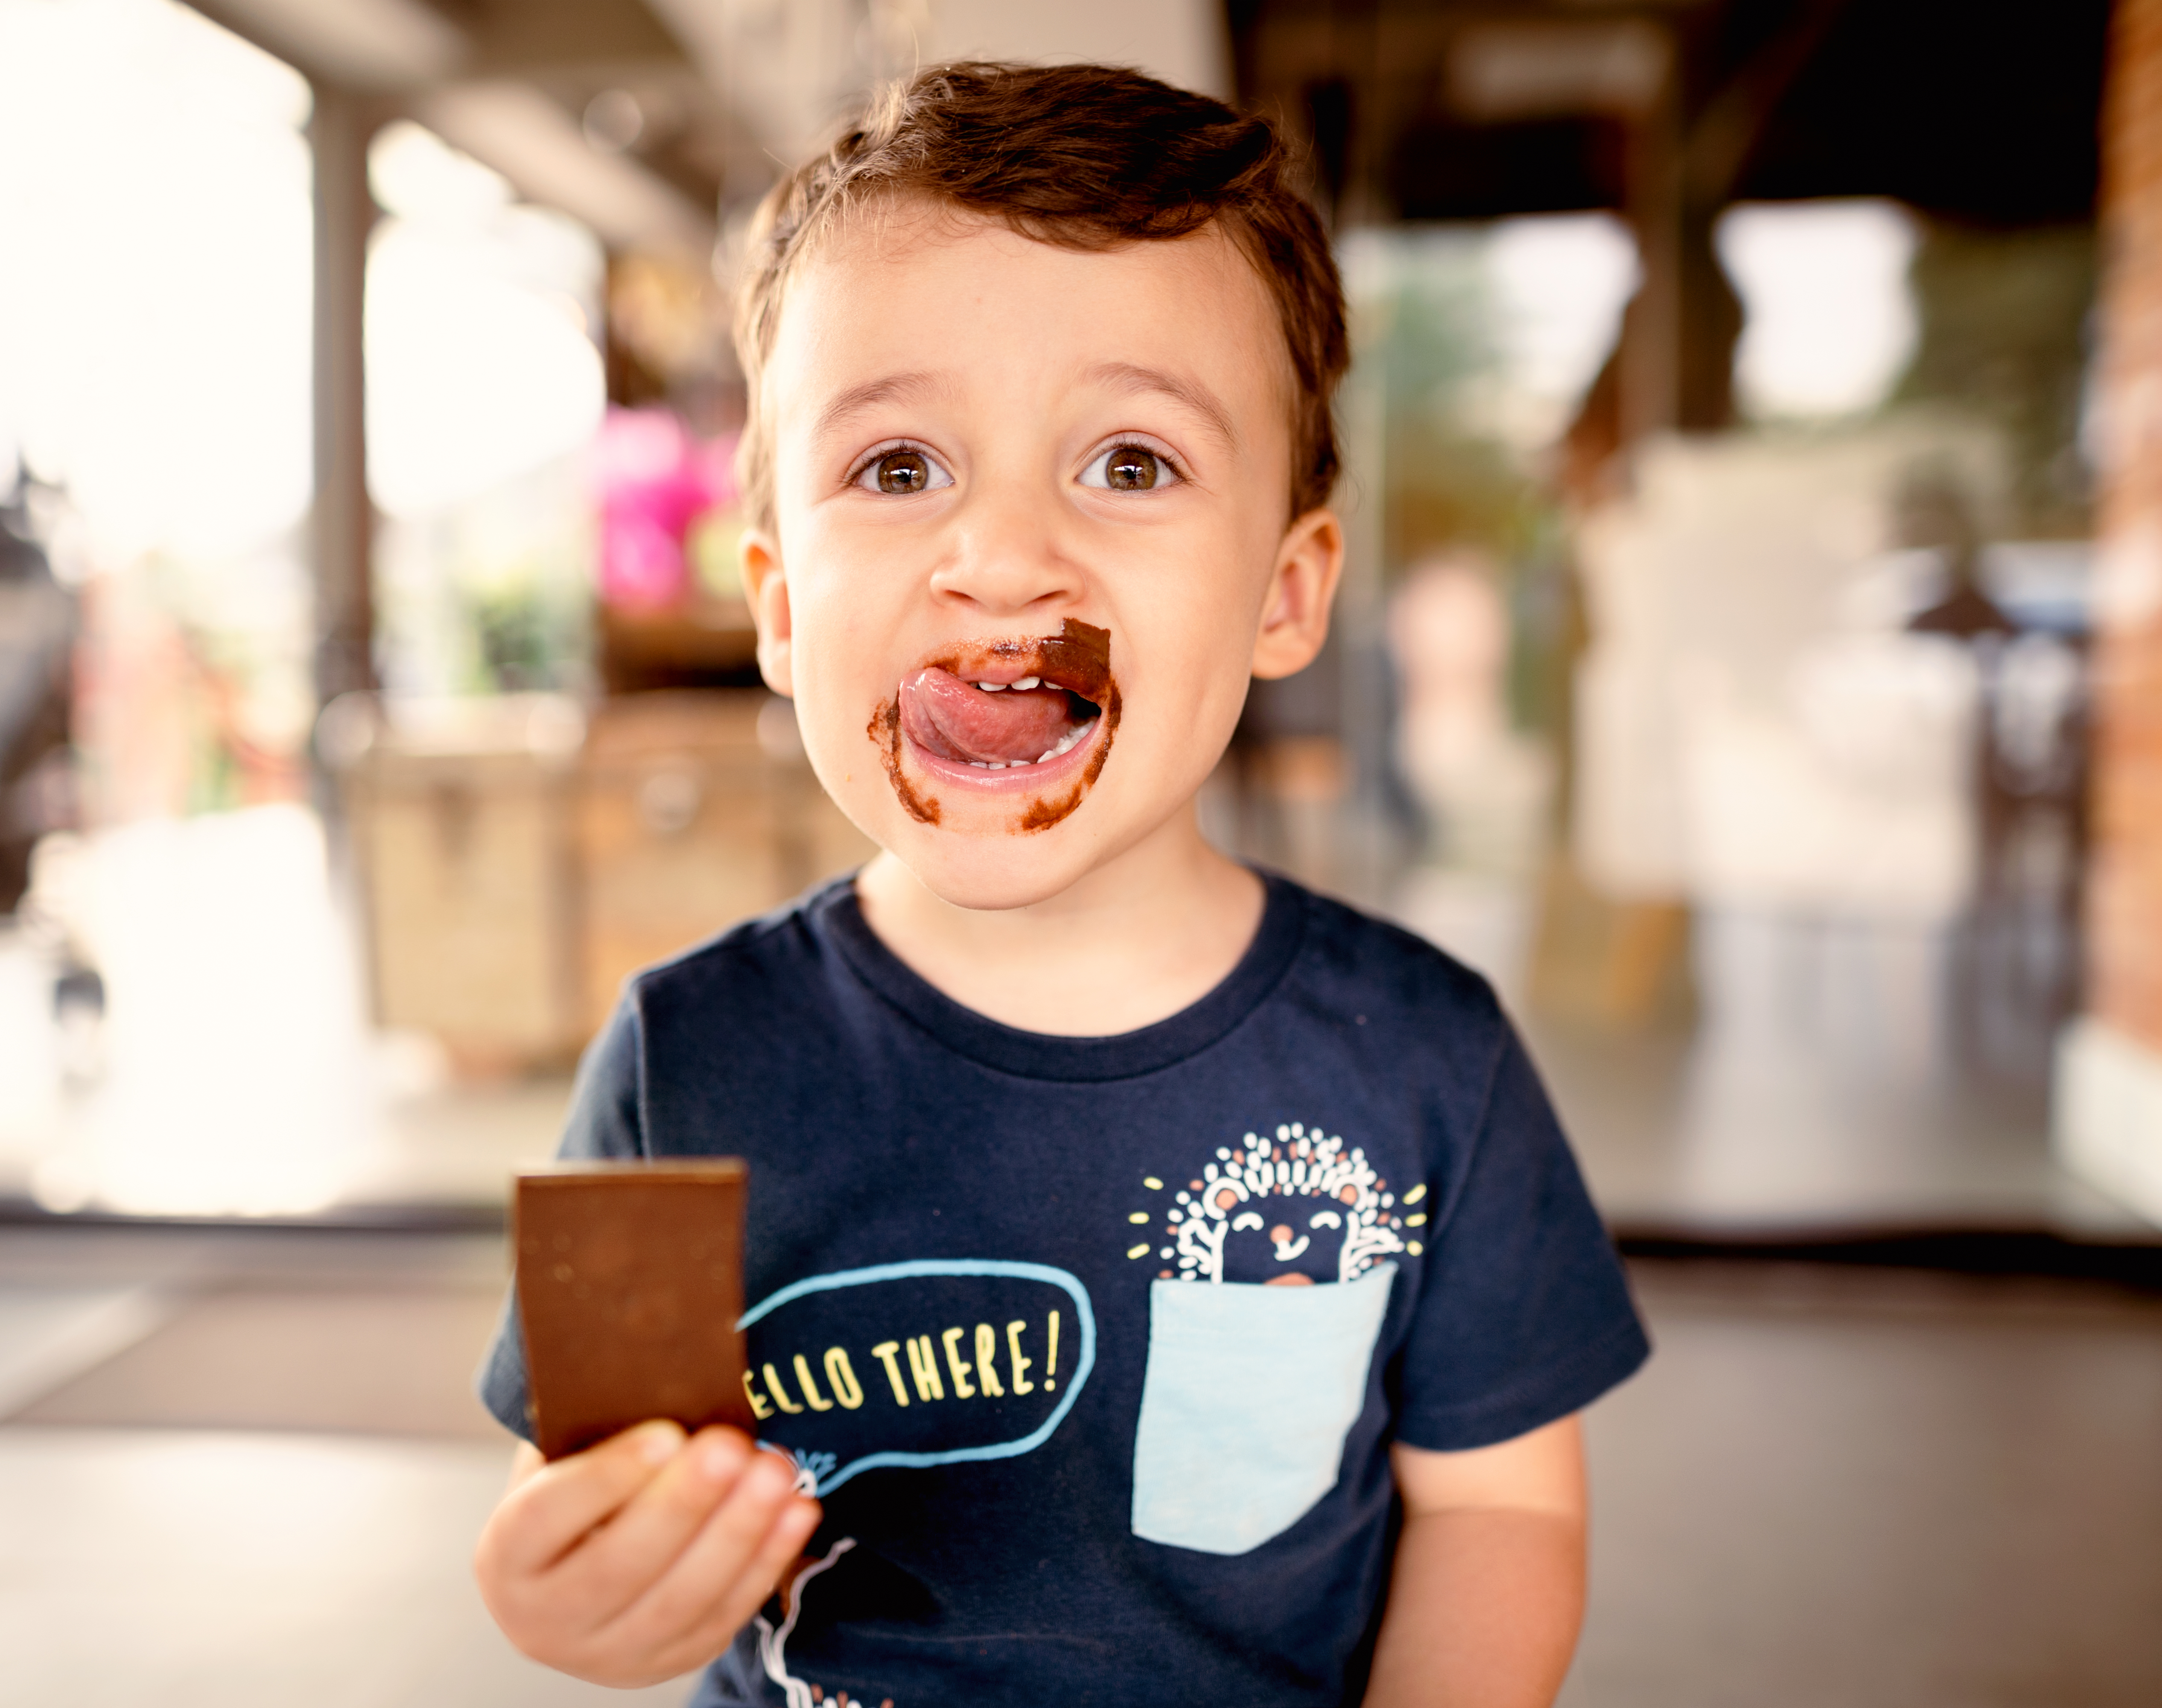 Smiling little boy licking messy chocolate from his face | Source: Getty Images